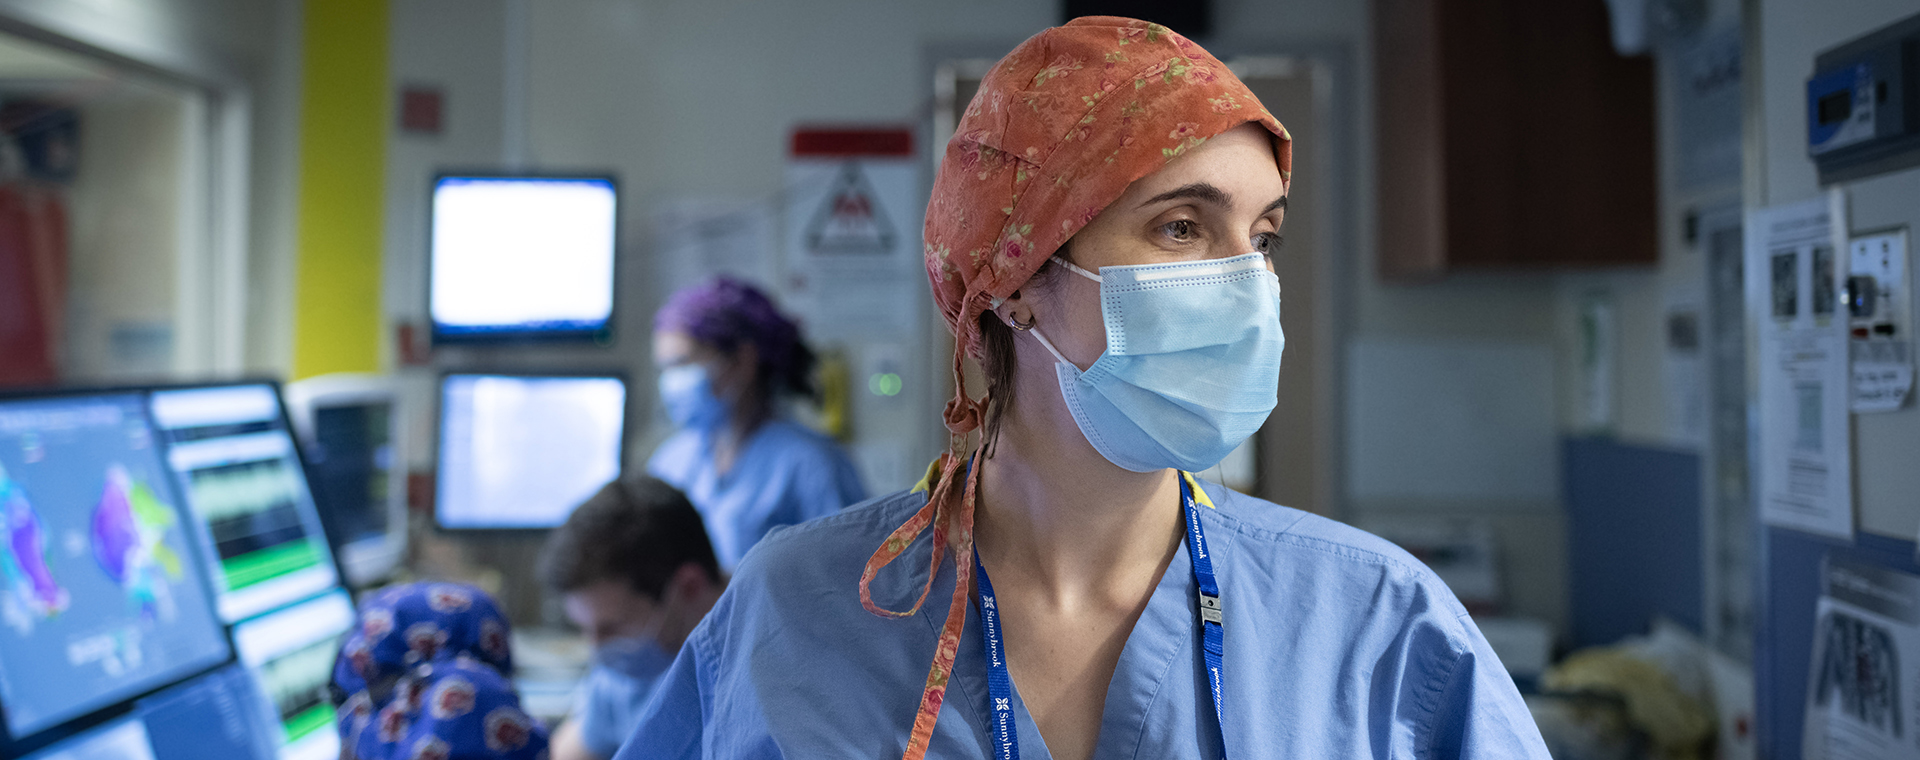 Doctor Maria Terricabras stands in the operating room